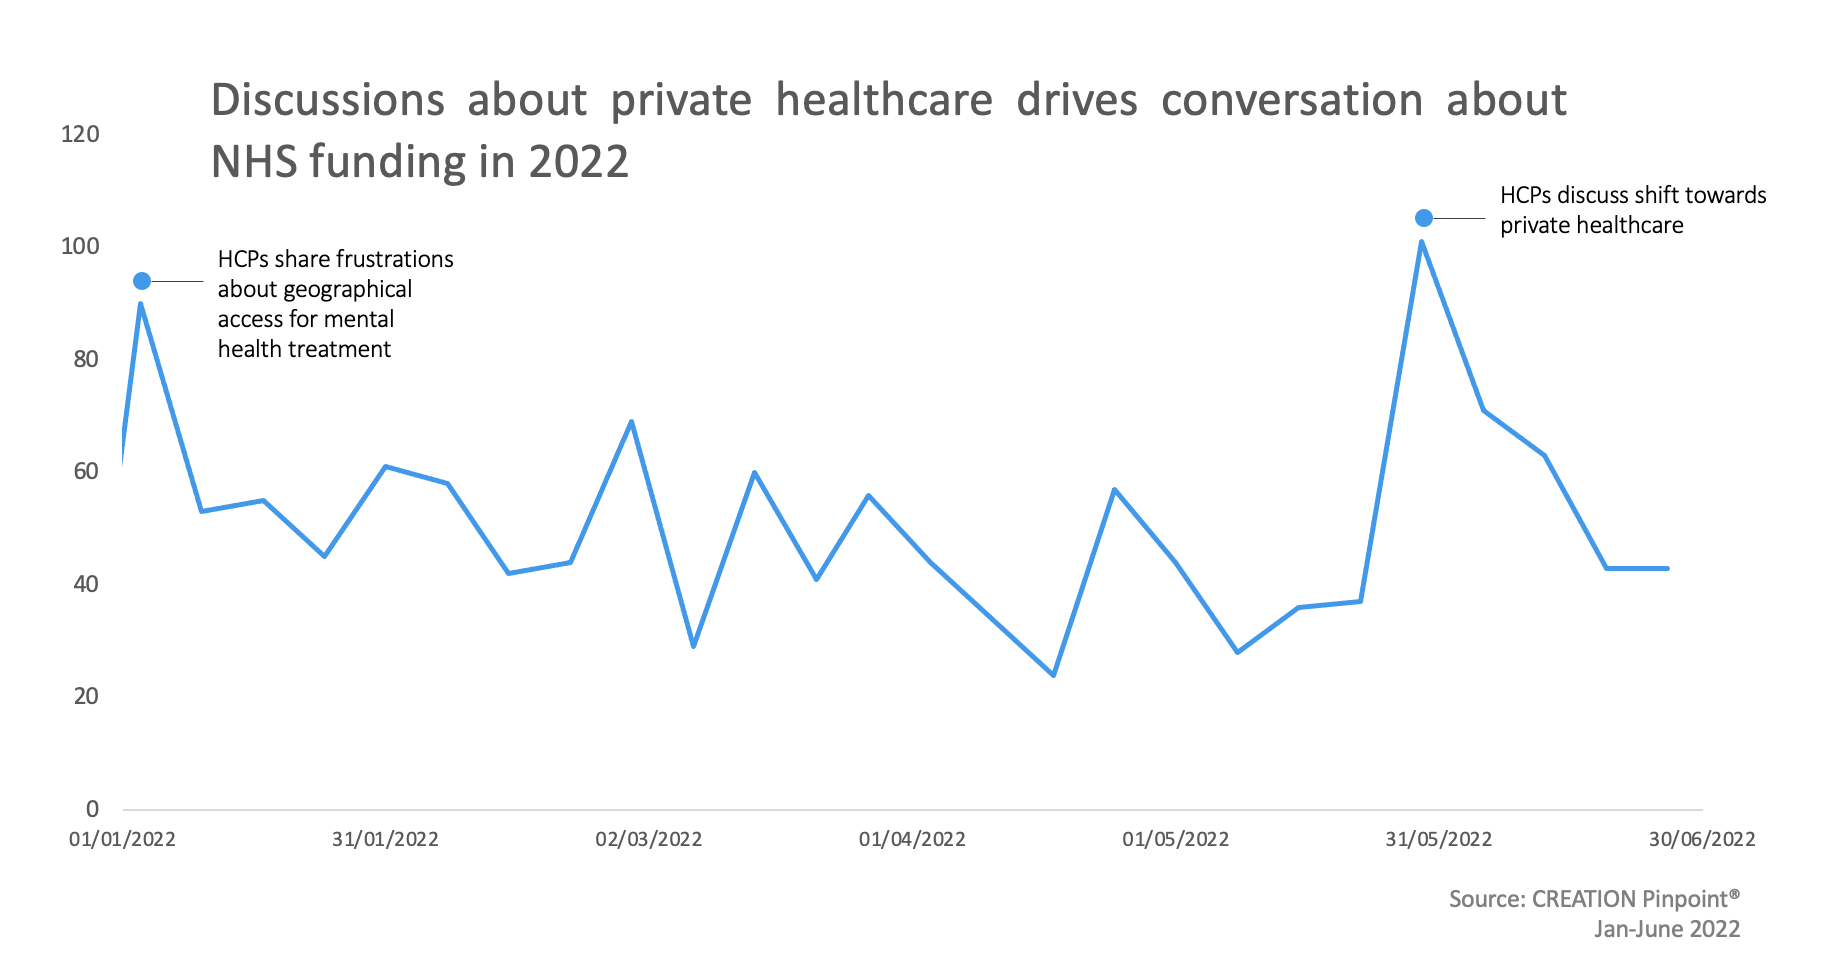 A graph showing discussions about how private healthcare drives conversation about NHS funding 2022